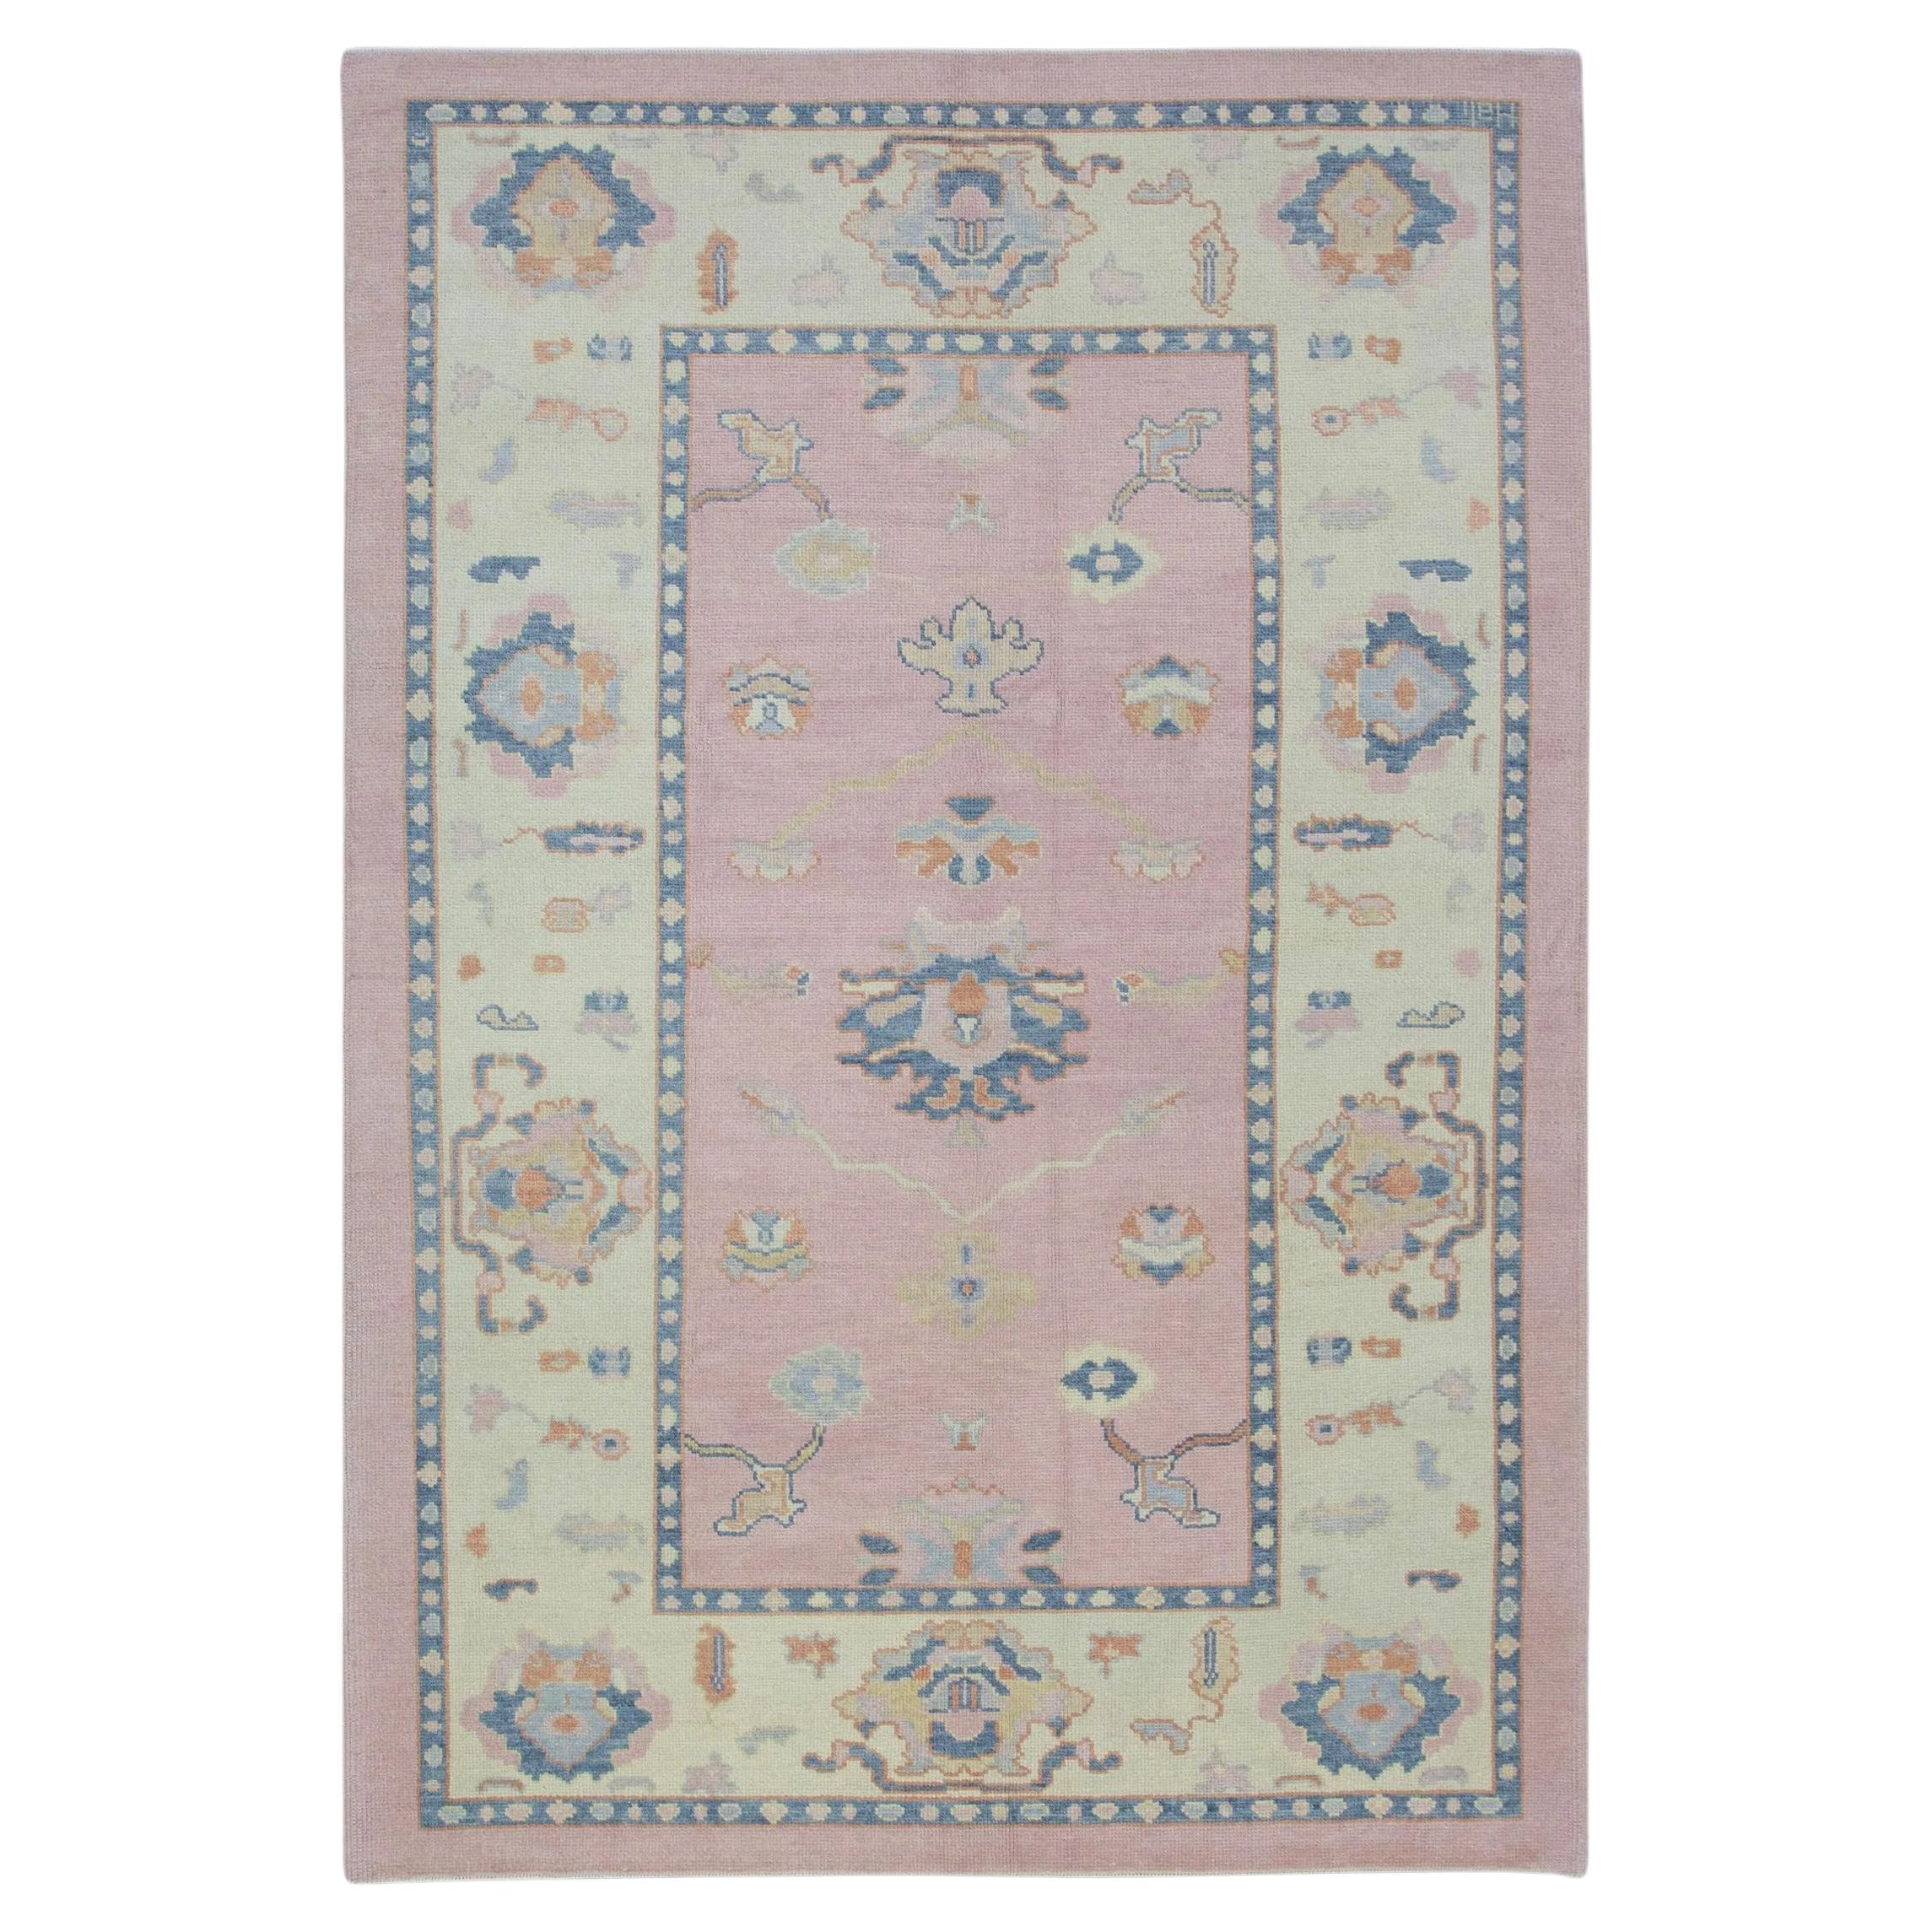 Pink and Blue Floral Design Handwoven Wool Modern Turkish Oushak Rug 6'4" x 9'2" For Sale